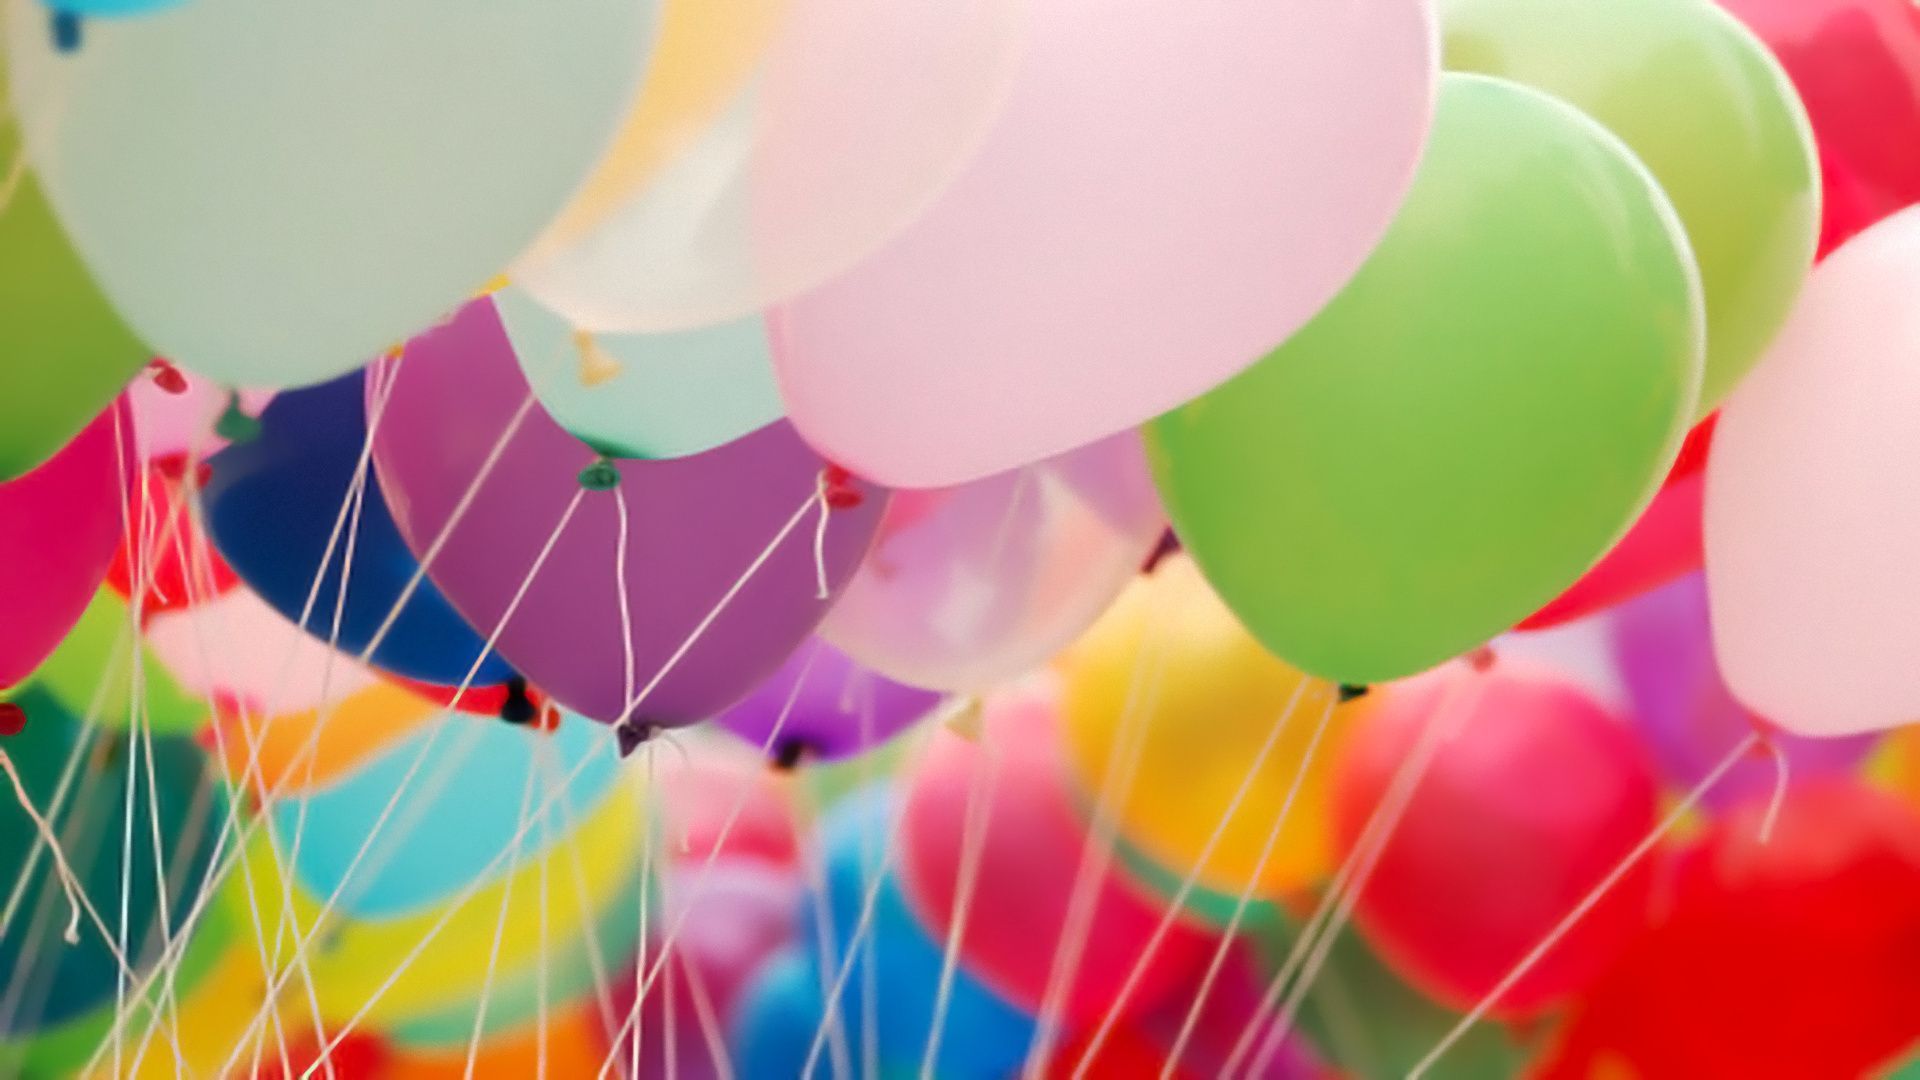 Balloons HD Wallpapers, Balloons Images Free, New Backgrounds